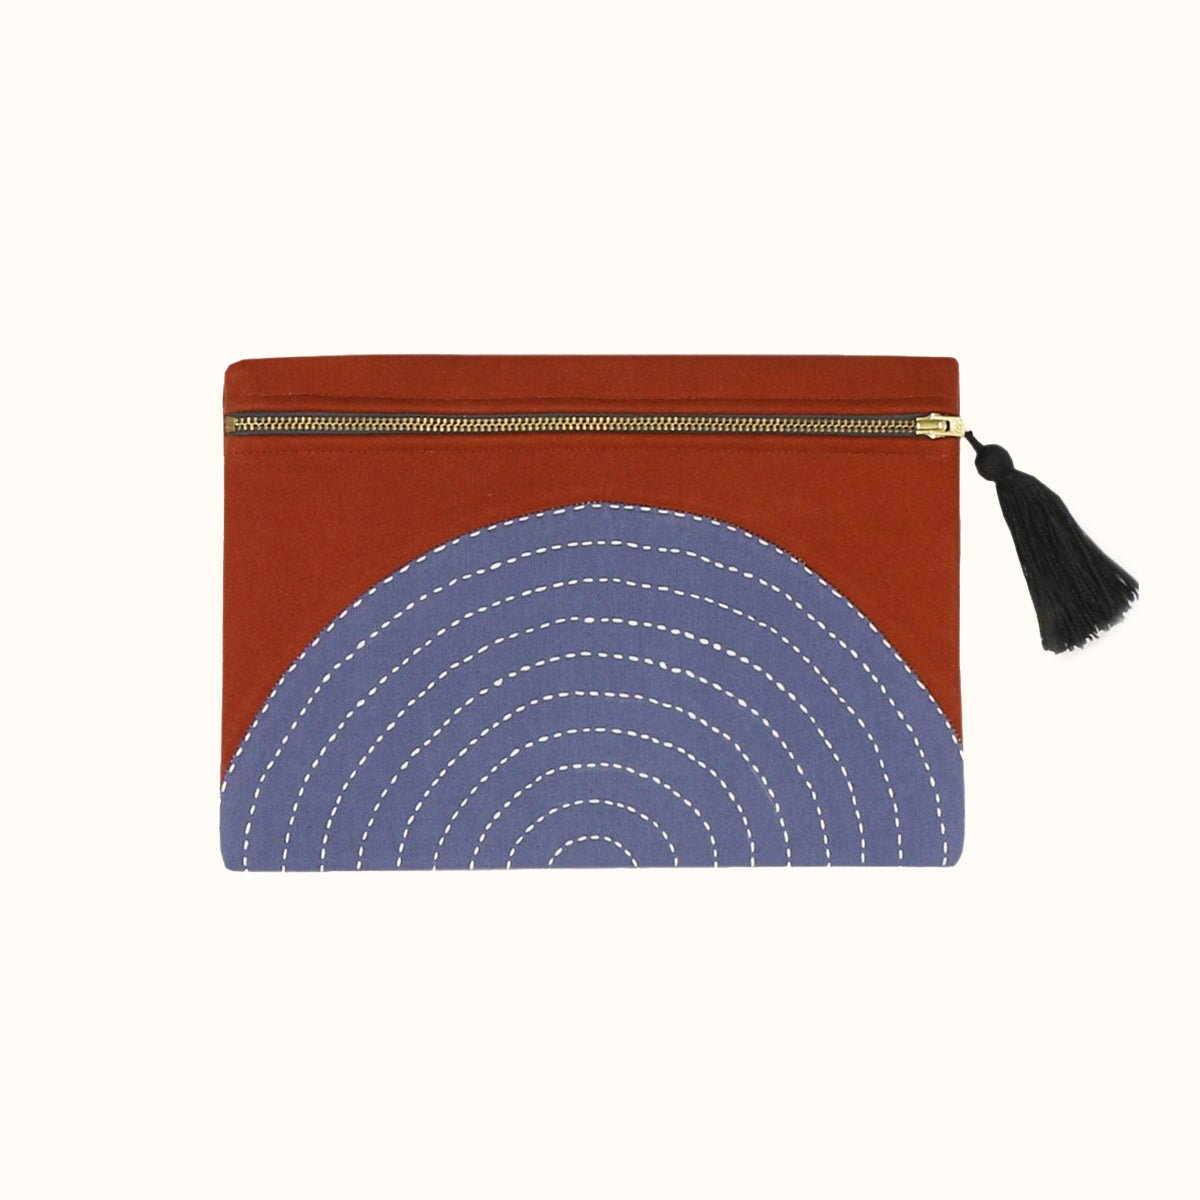 Rust colored square pouch with a slate grey cross-stitch concentric pattern. Includes a zipper with a black tassel. Designed by Anchal in Louisville, Kentucky and handmade in Ajmer, India.